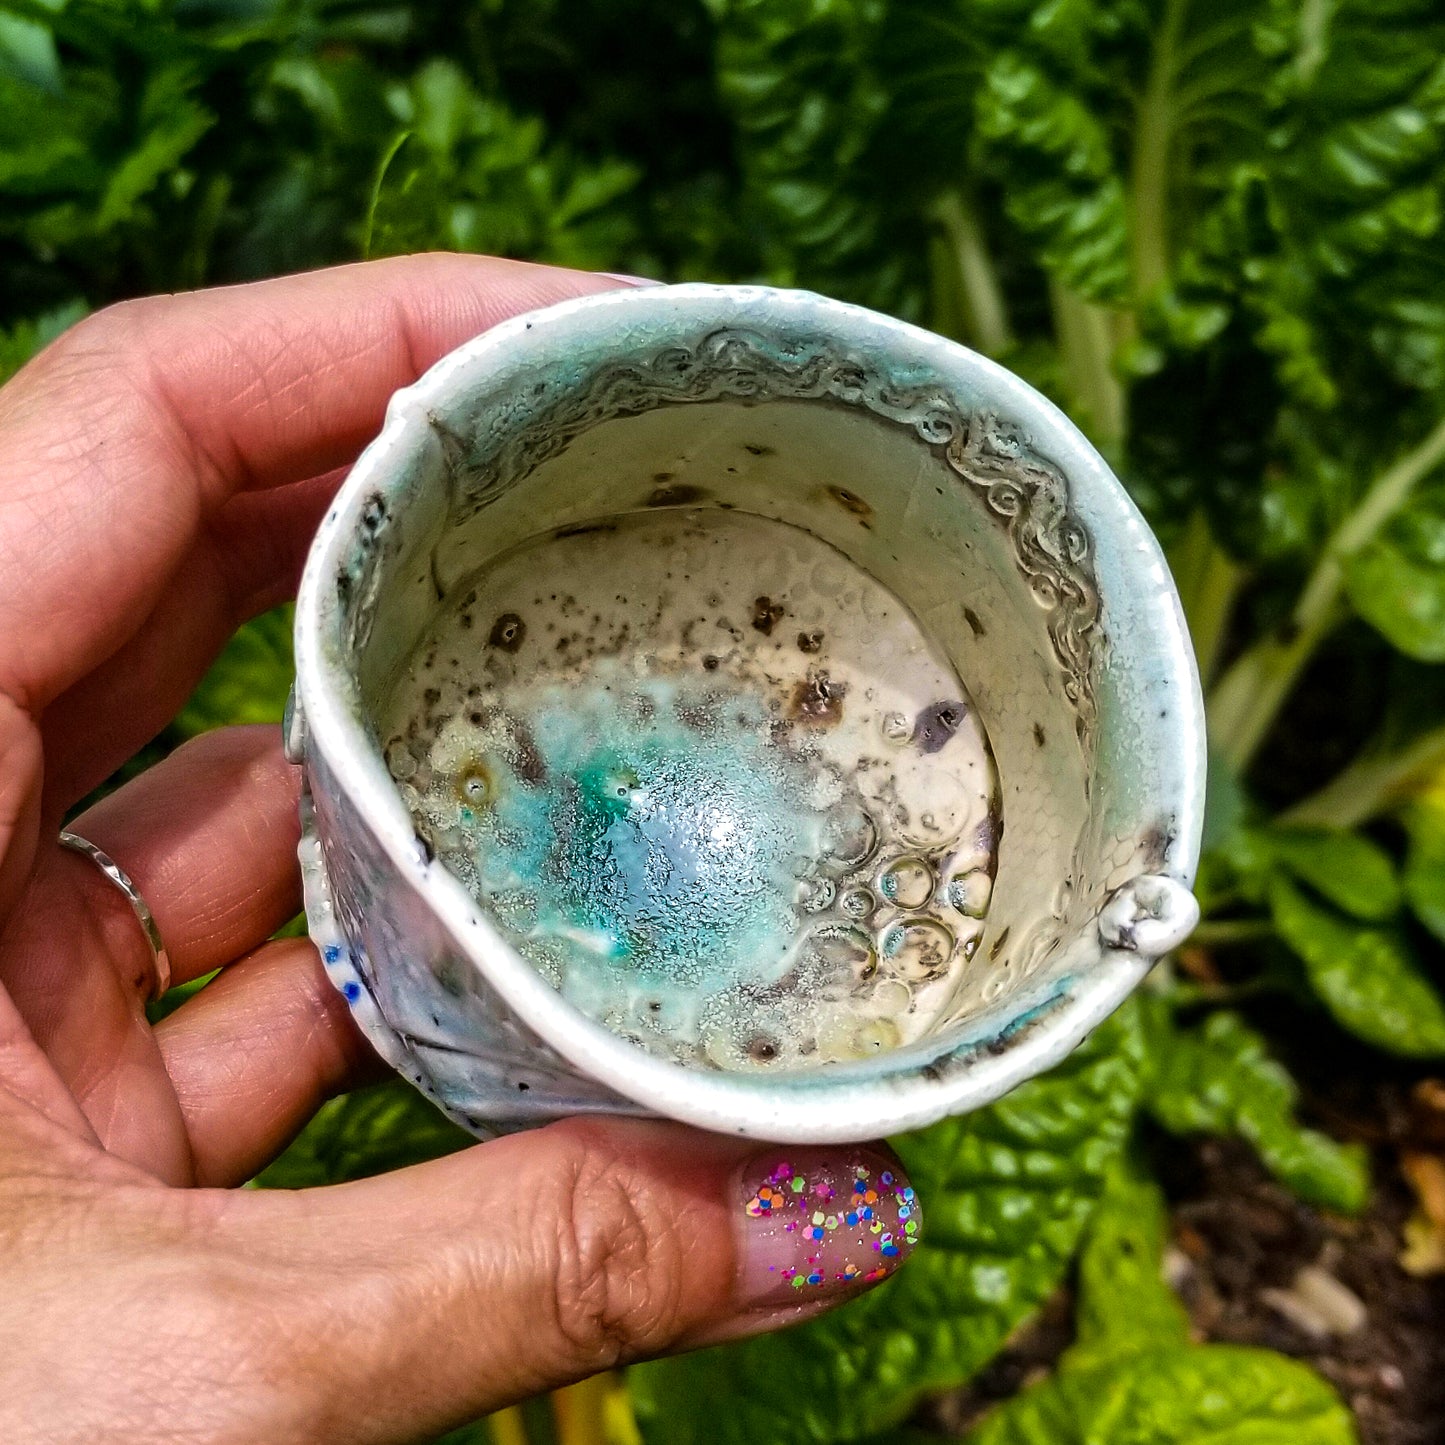 Inside detail of handmade stoneware ceramic soda fired cup blue color with pressed textures